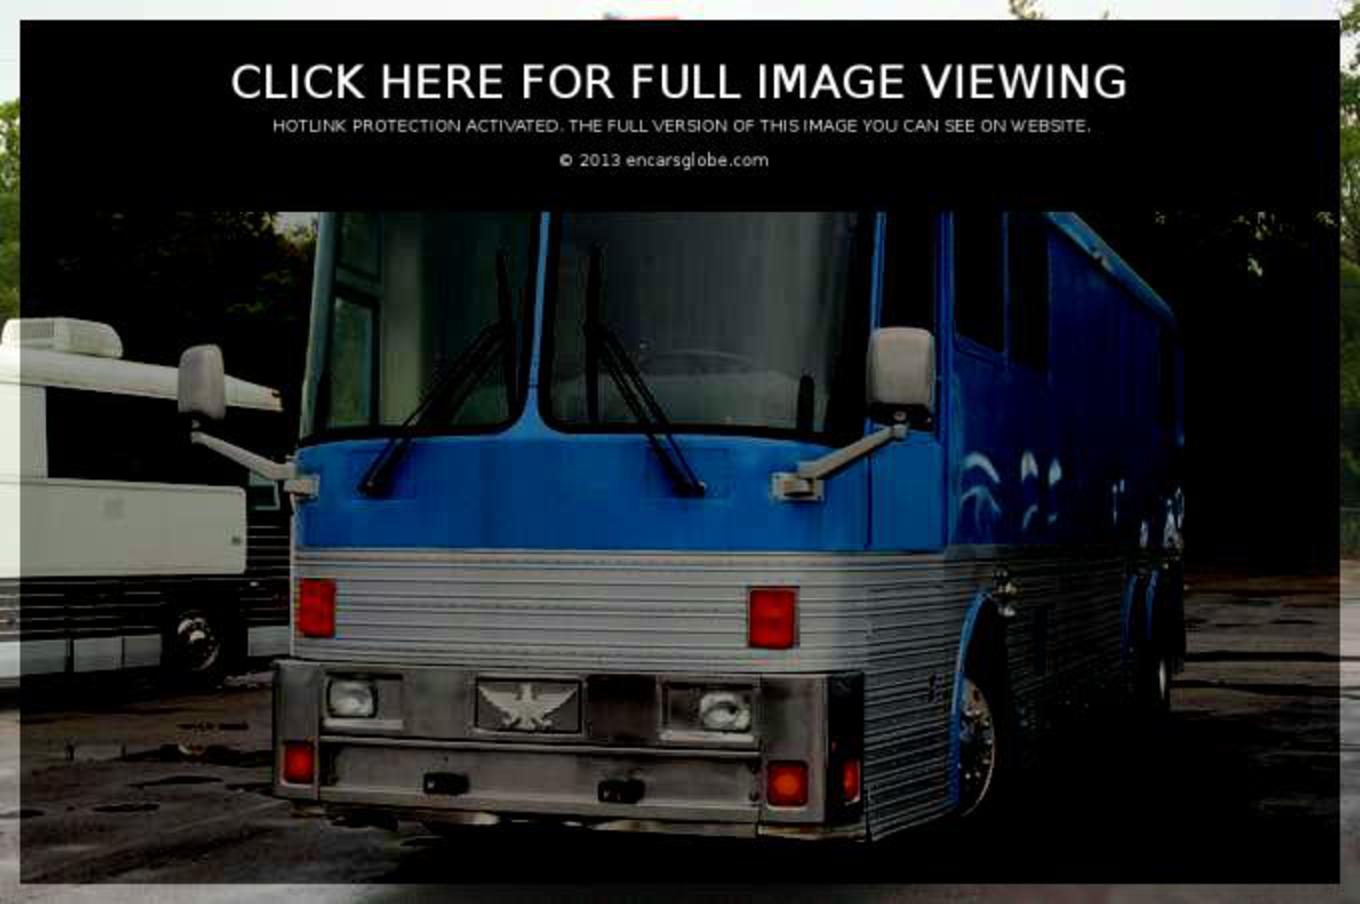 Prevost LeMirage XL-II Photo Gallery: Photo #01 out of 11, Image ...